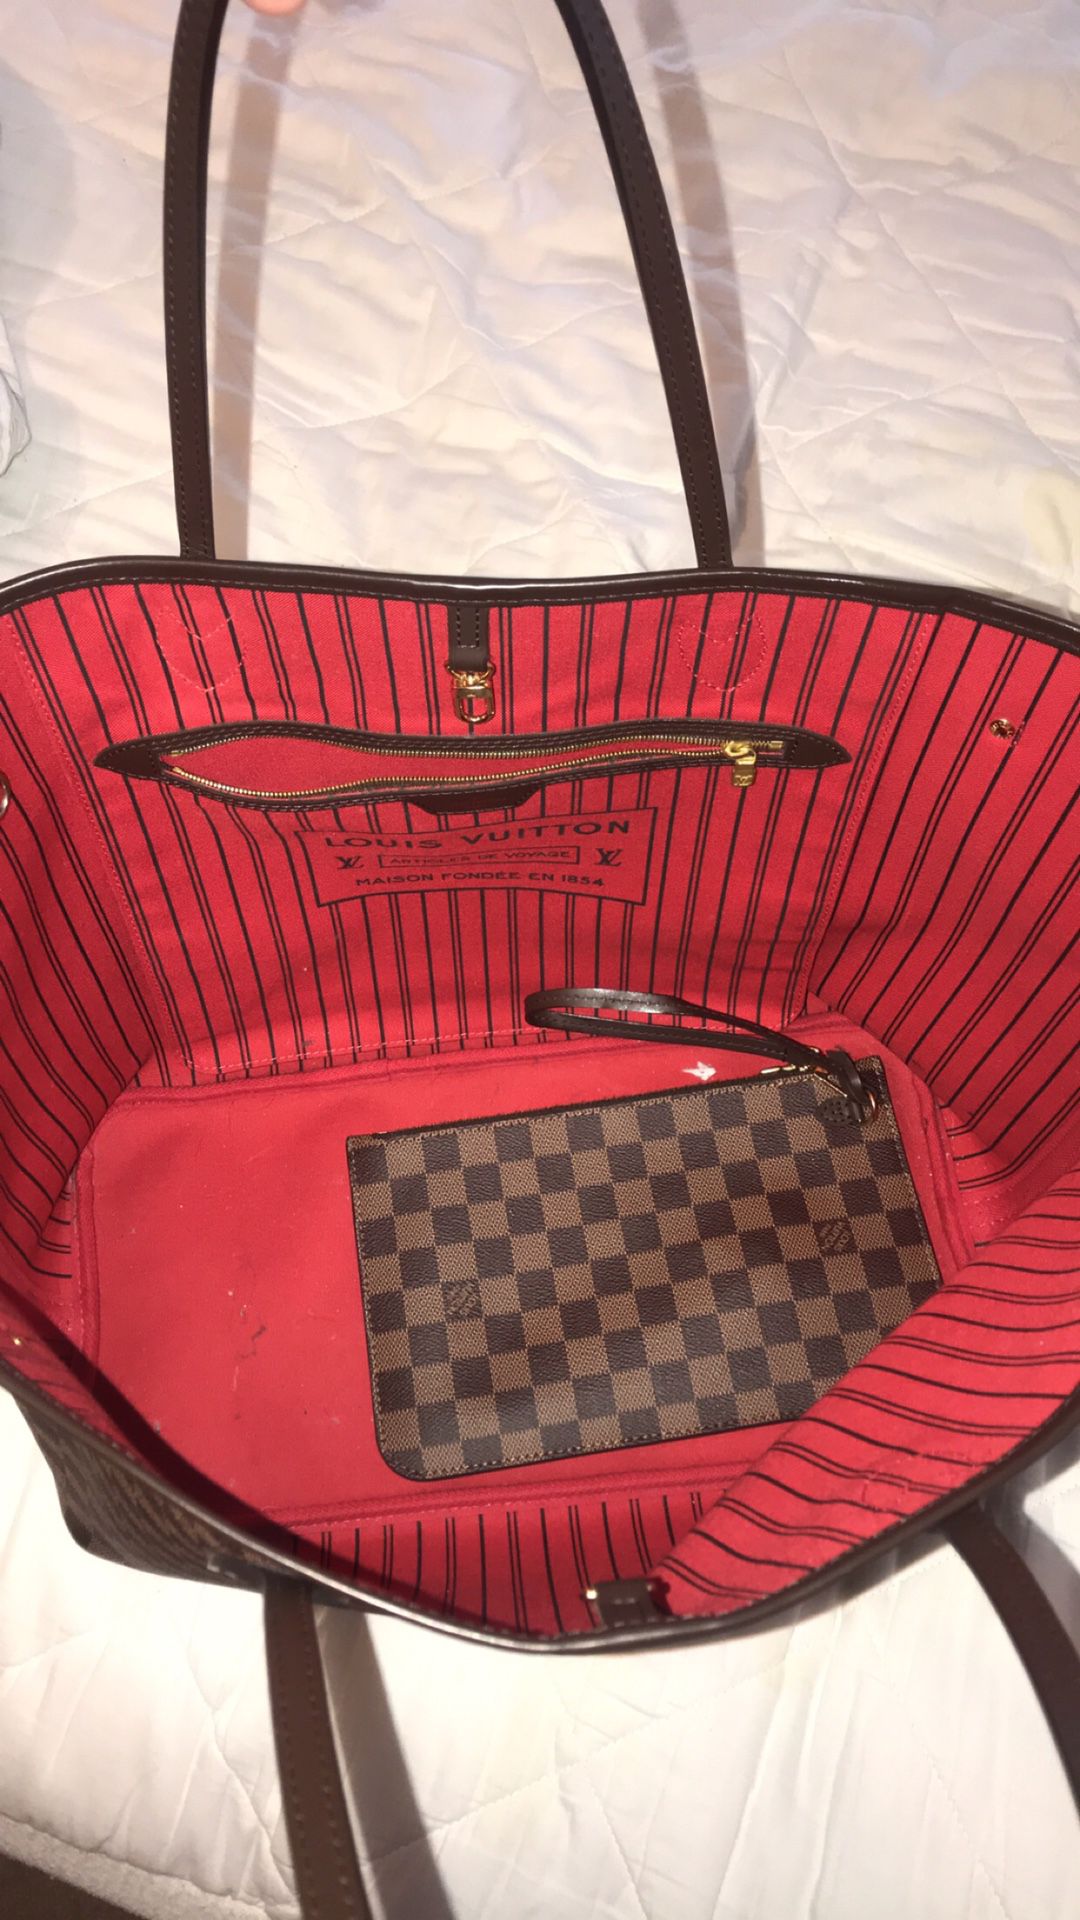 Louis Vuitton purse and hand bag combo luxury pack 100% real deal